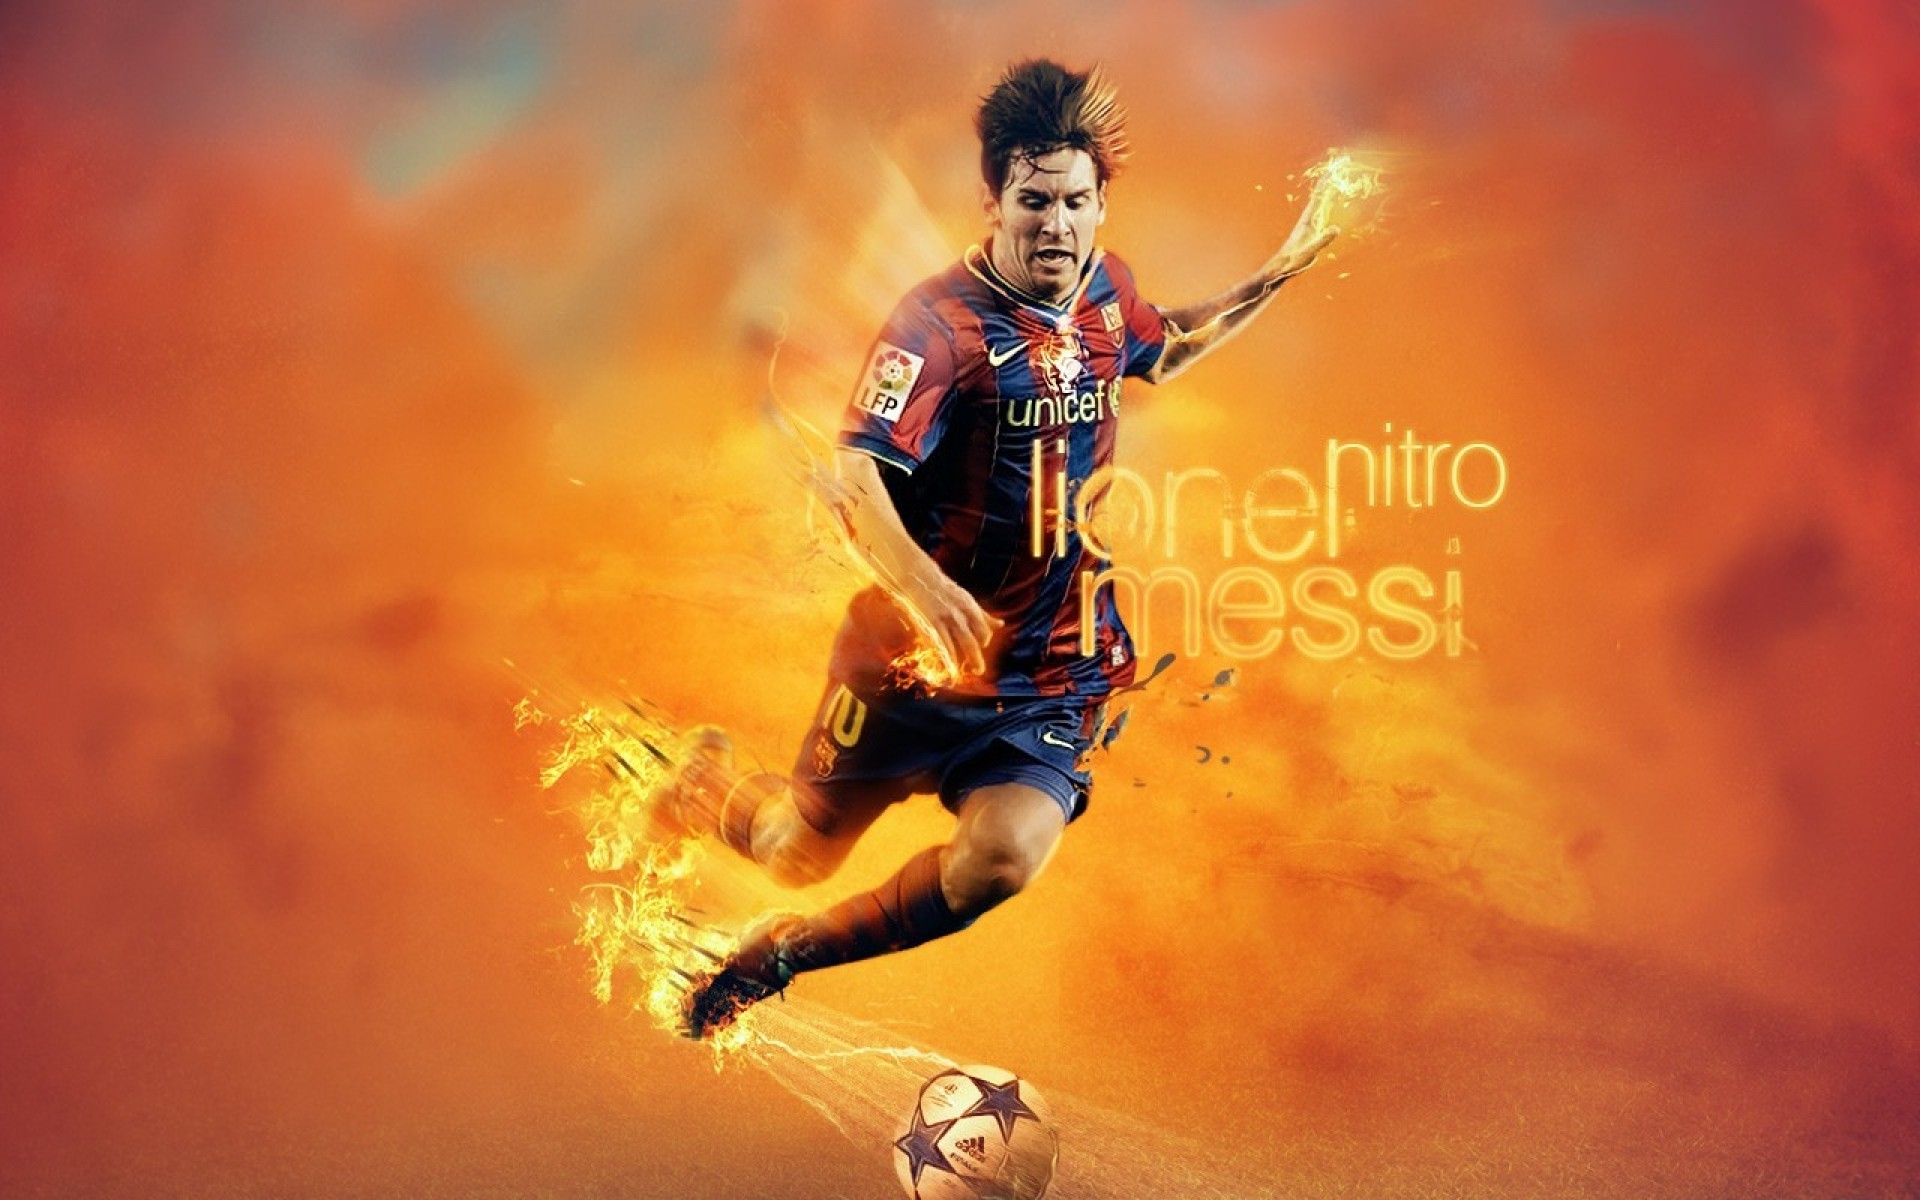 Cool Soccer Backgrounds 59 Images